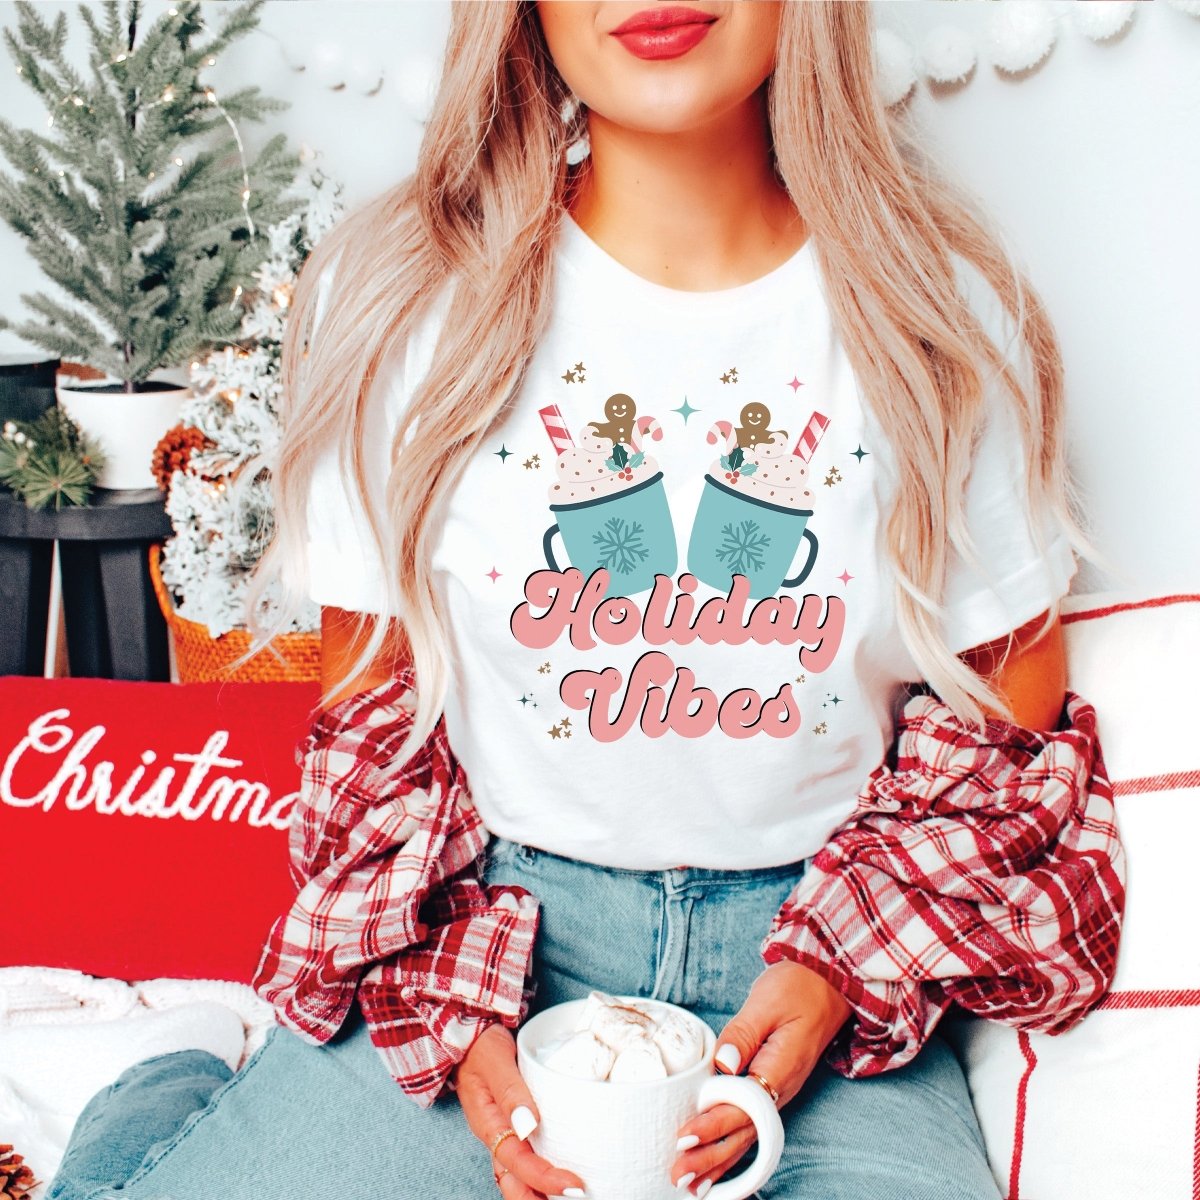 Holiday Vibes Mugs Bella Graphic Wholesale Tee - Limeberry Designs